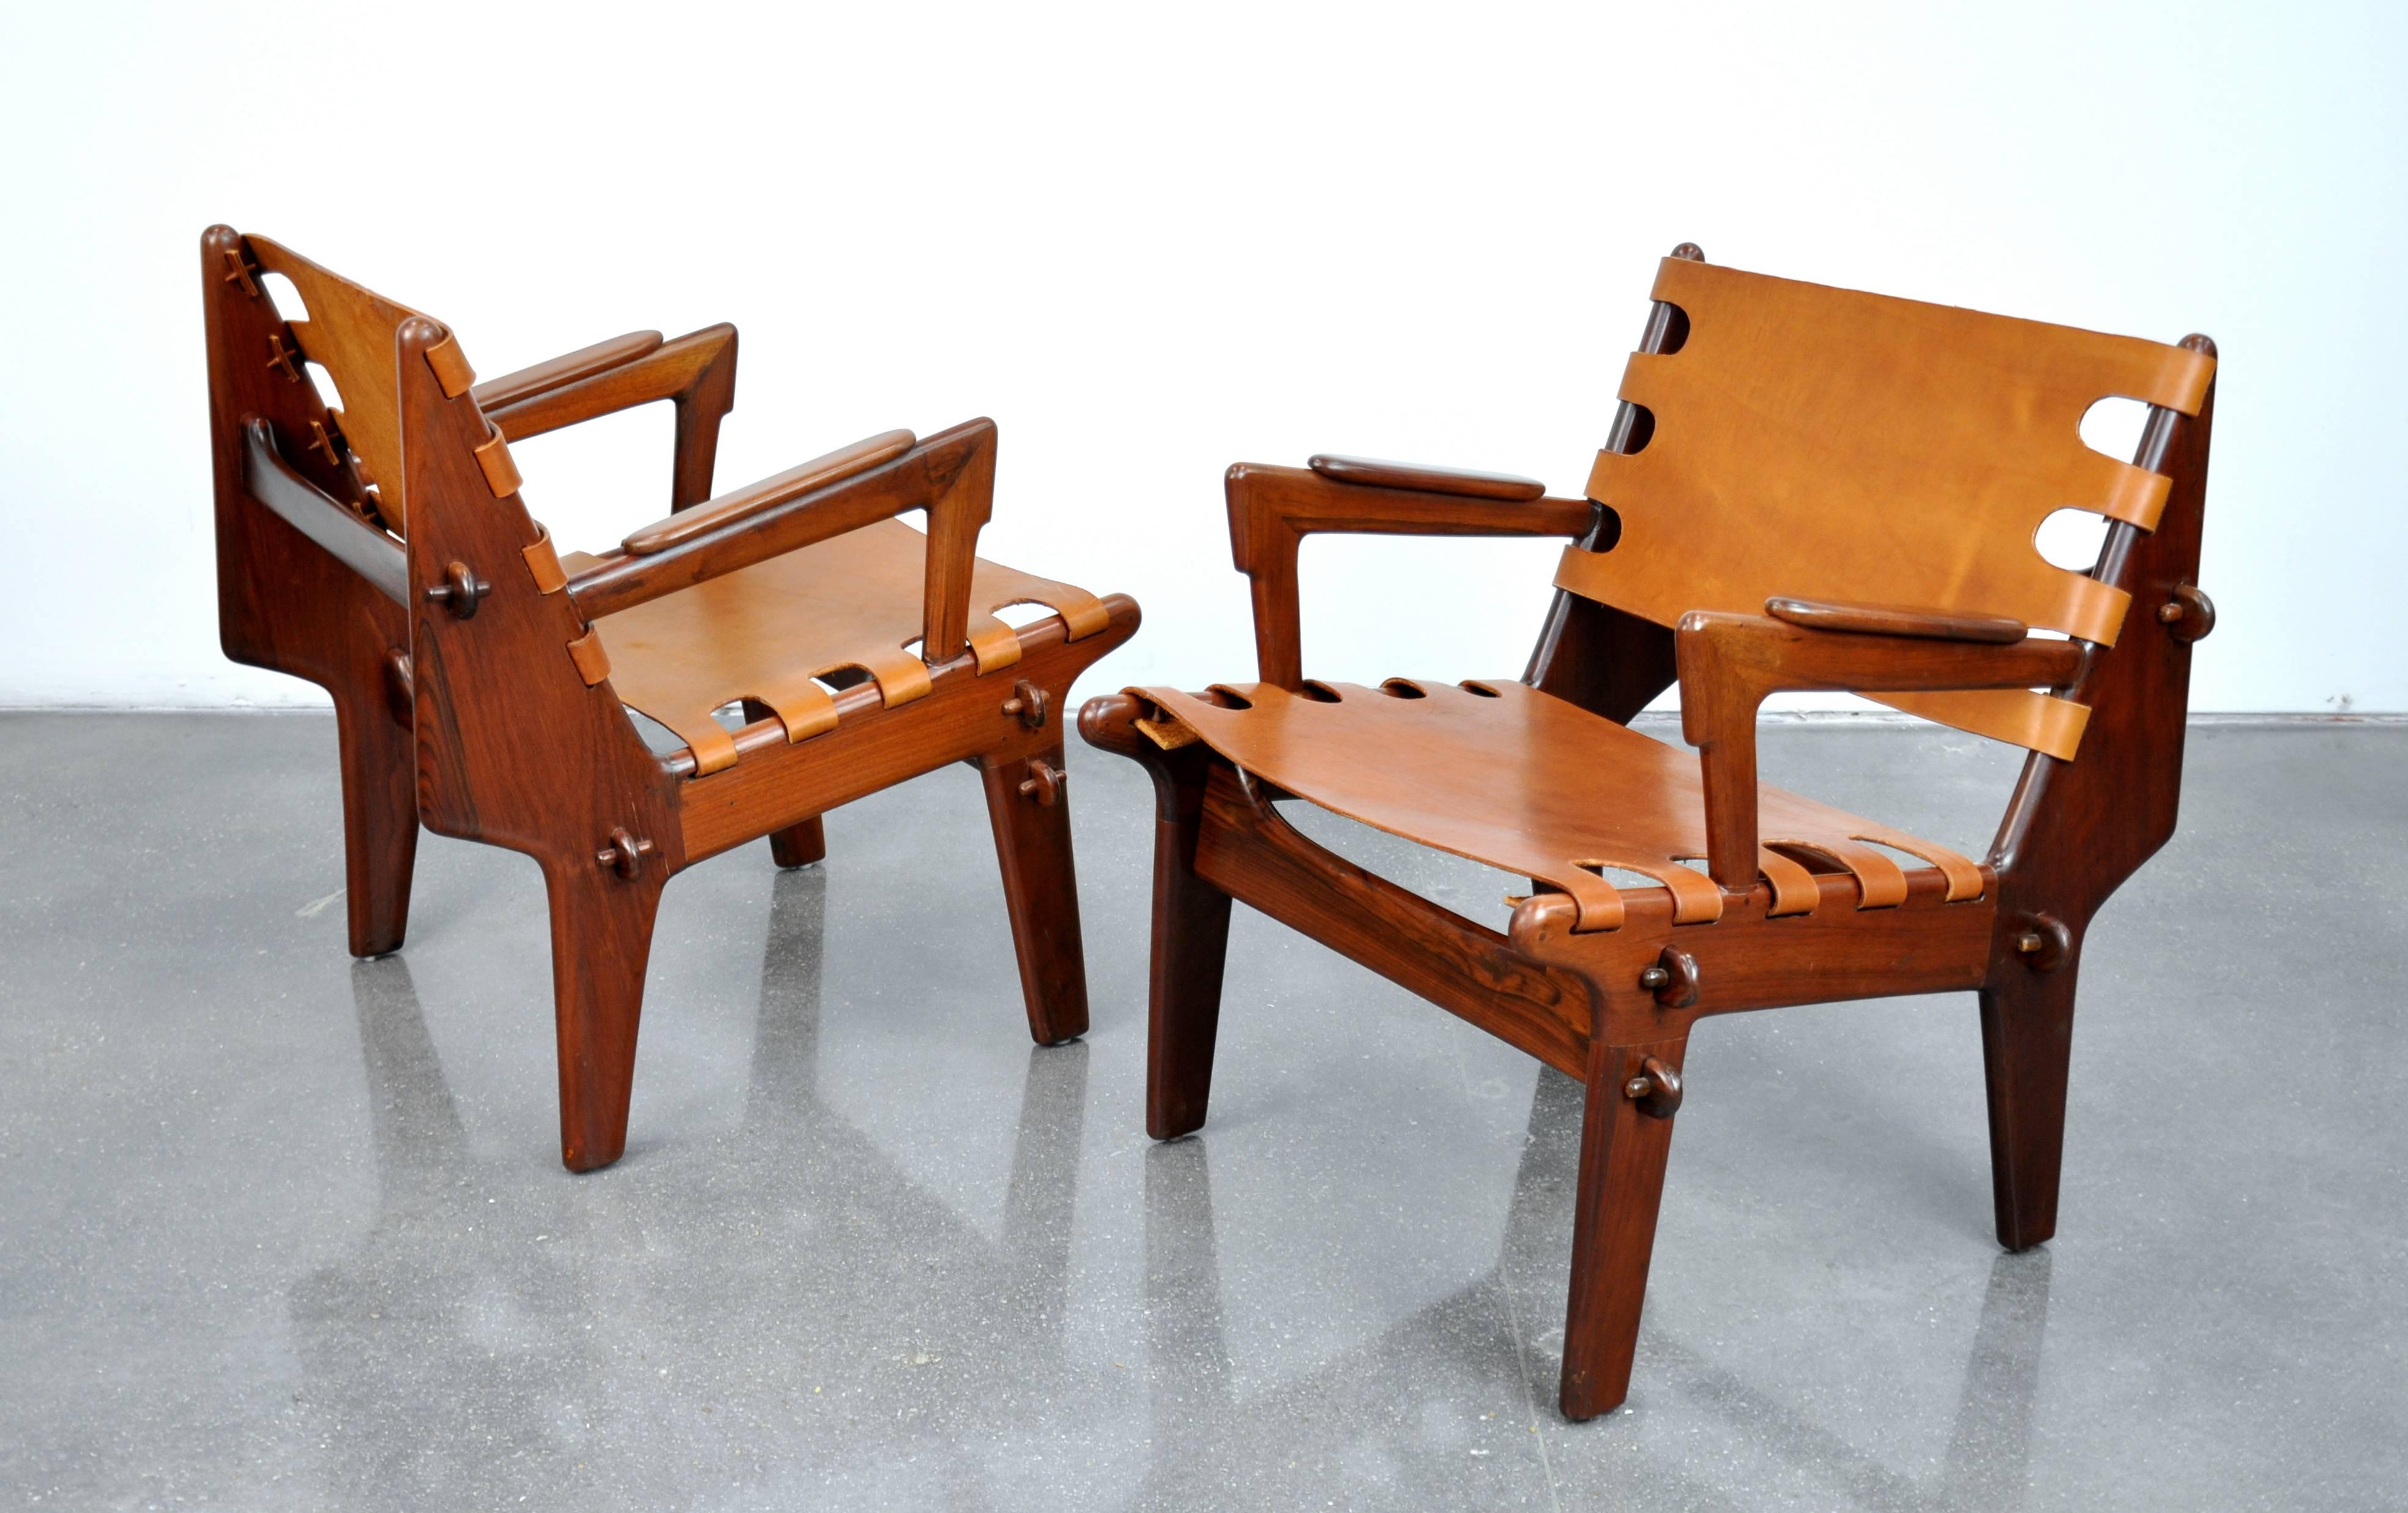 Amazing pair of midcentury Safari style easy lounge chairs and footstool by Ecuadorian designer Angel Pazmino. The sculptural rosewood frames are slung with newer caramel colored leather and feature a wooden peg construction that allows the pieces